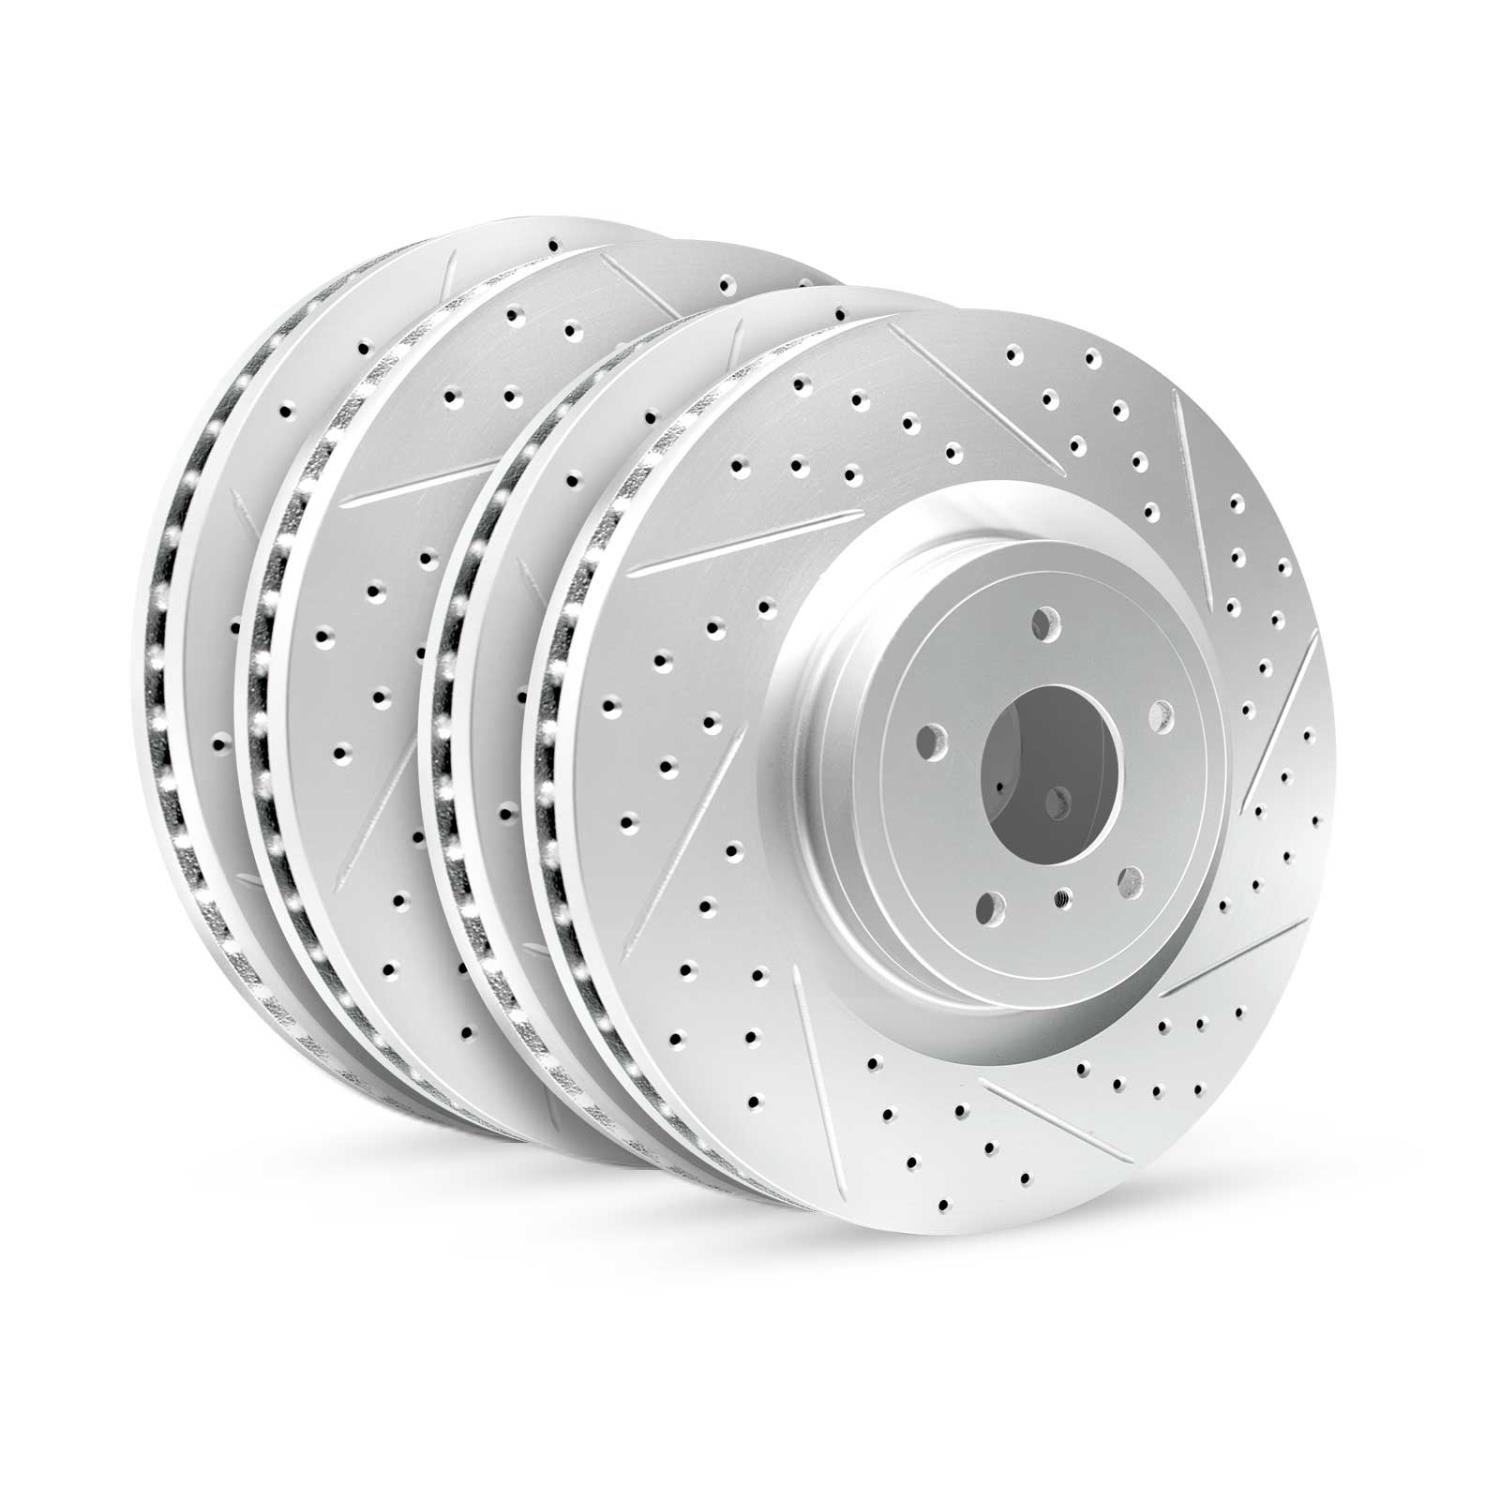 GEO-Carbon Drilled/Slotted Rotors, 2003-2006 BMW, Position: Front/Rear